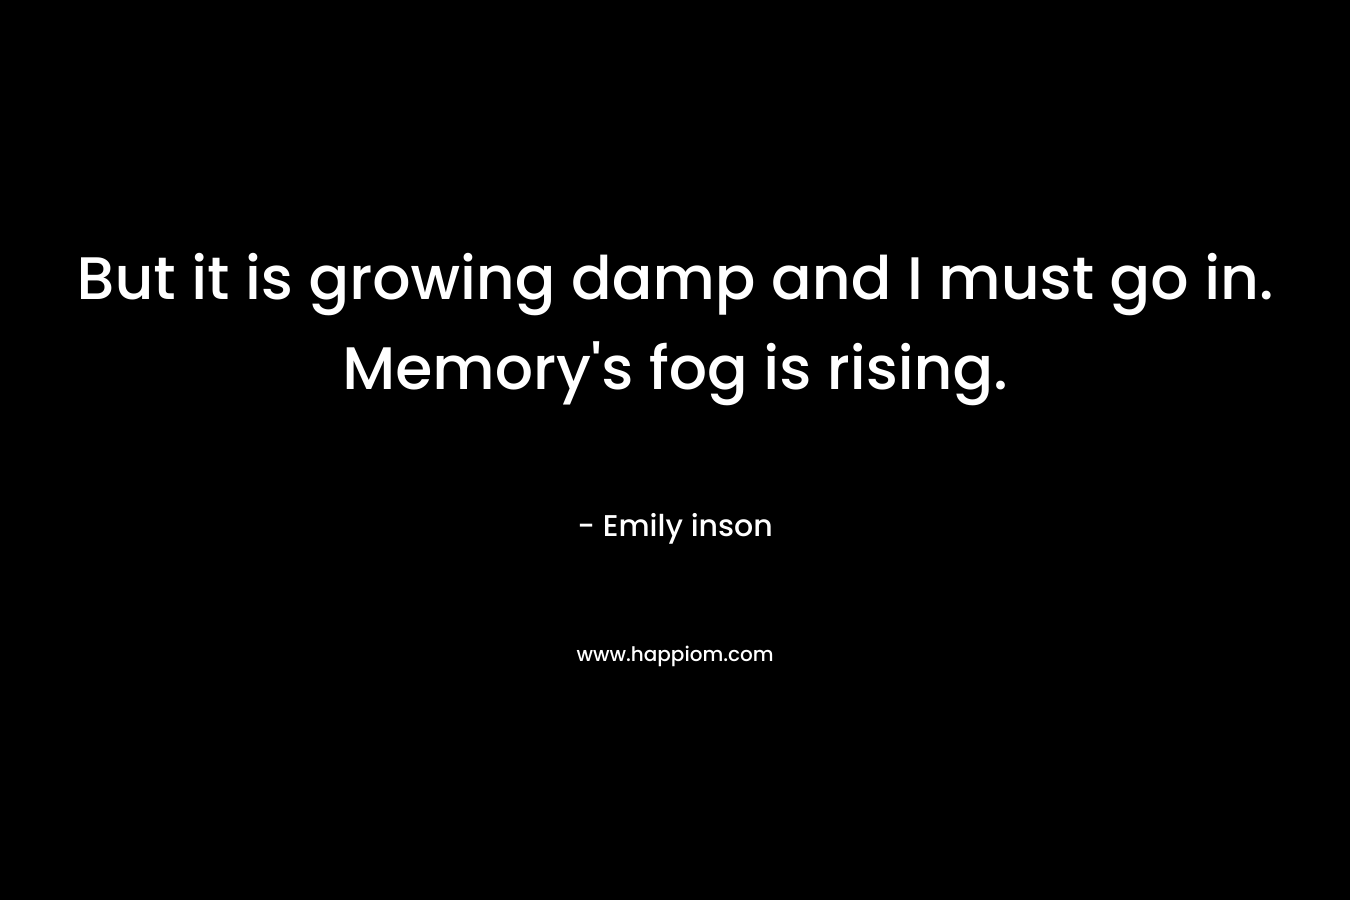 But it is growing damp and I must go in. Memory’s fog is rising. – Emily inson